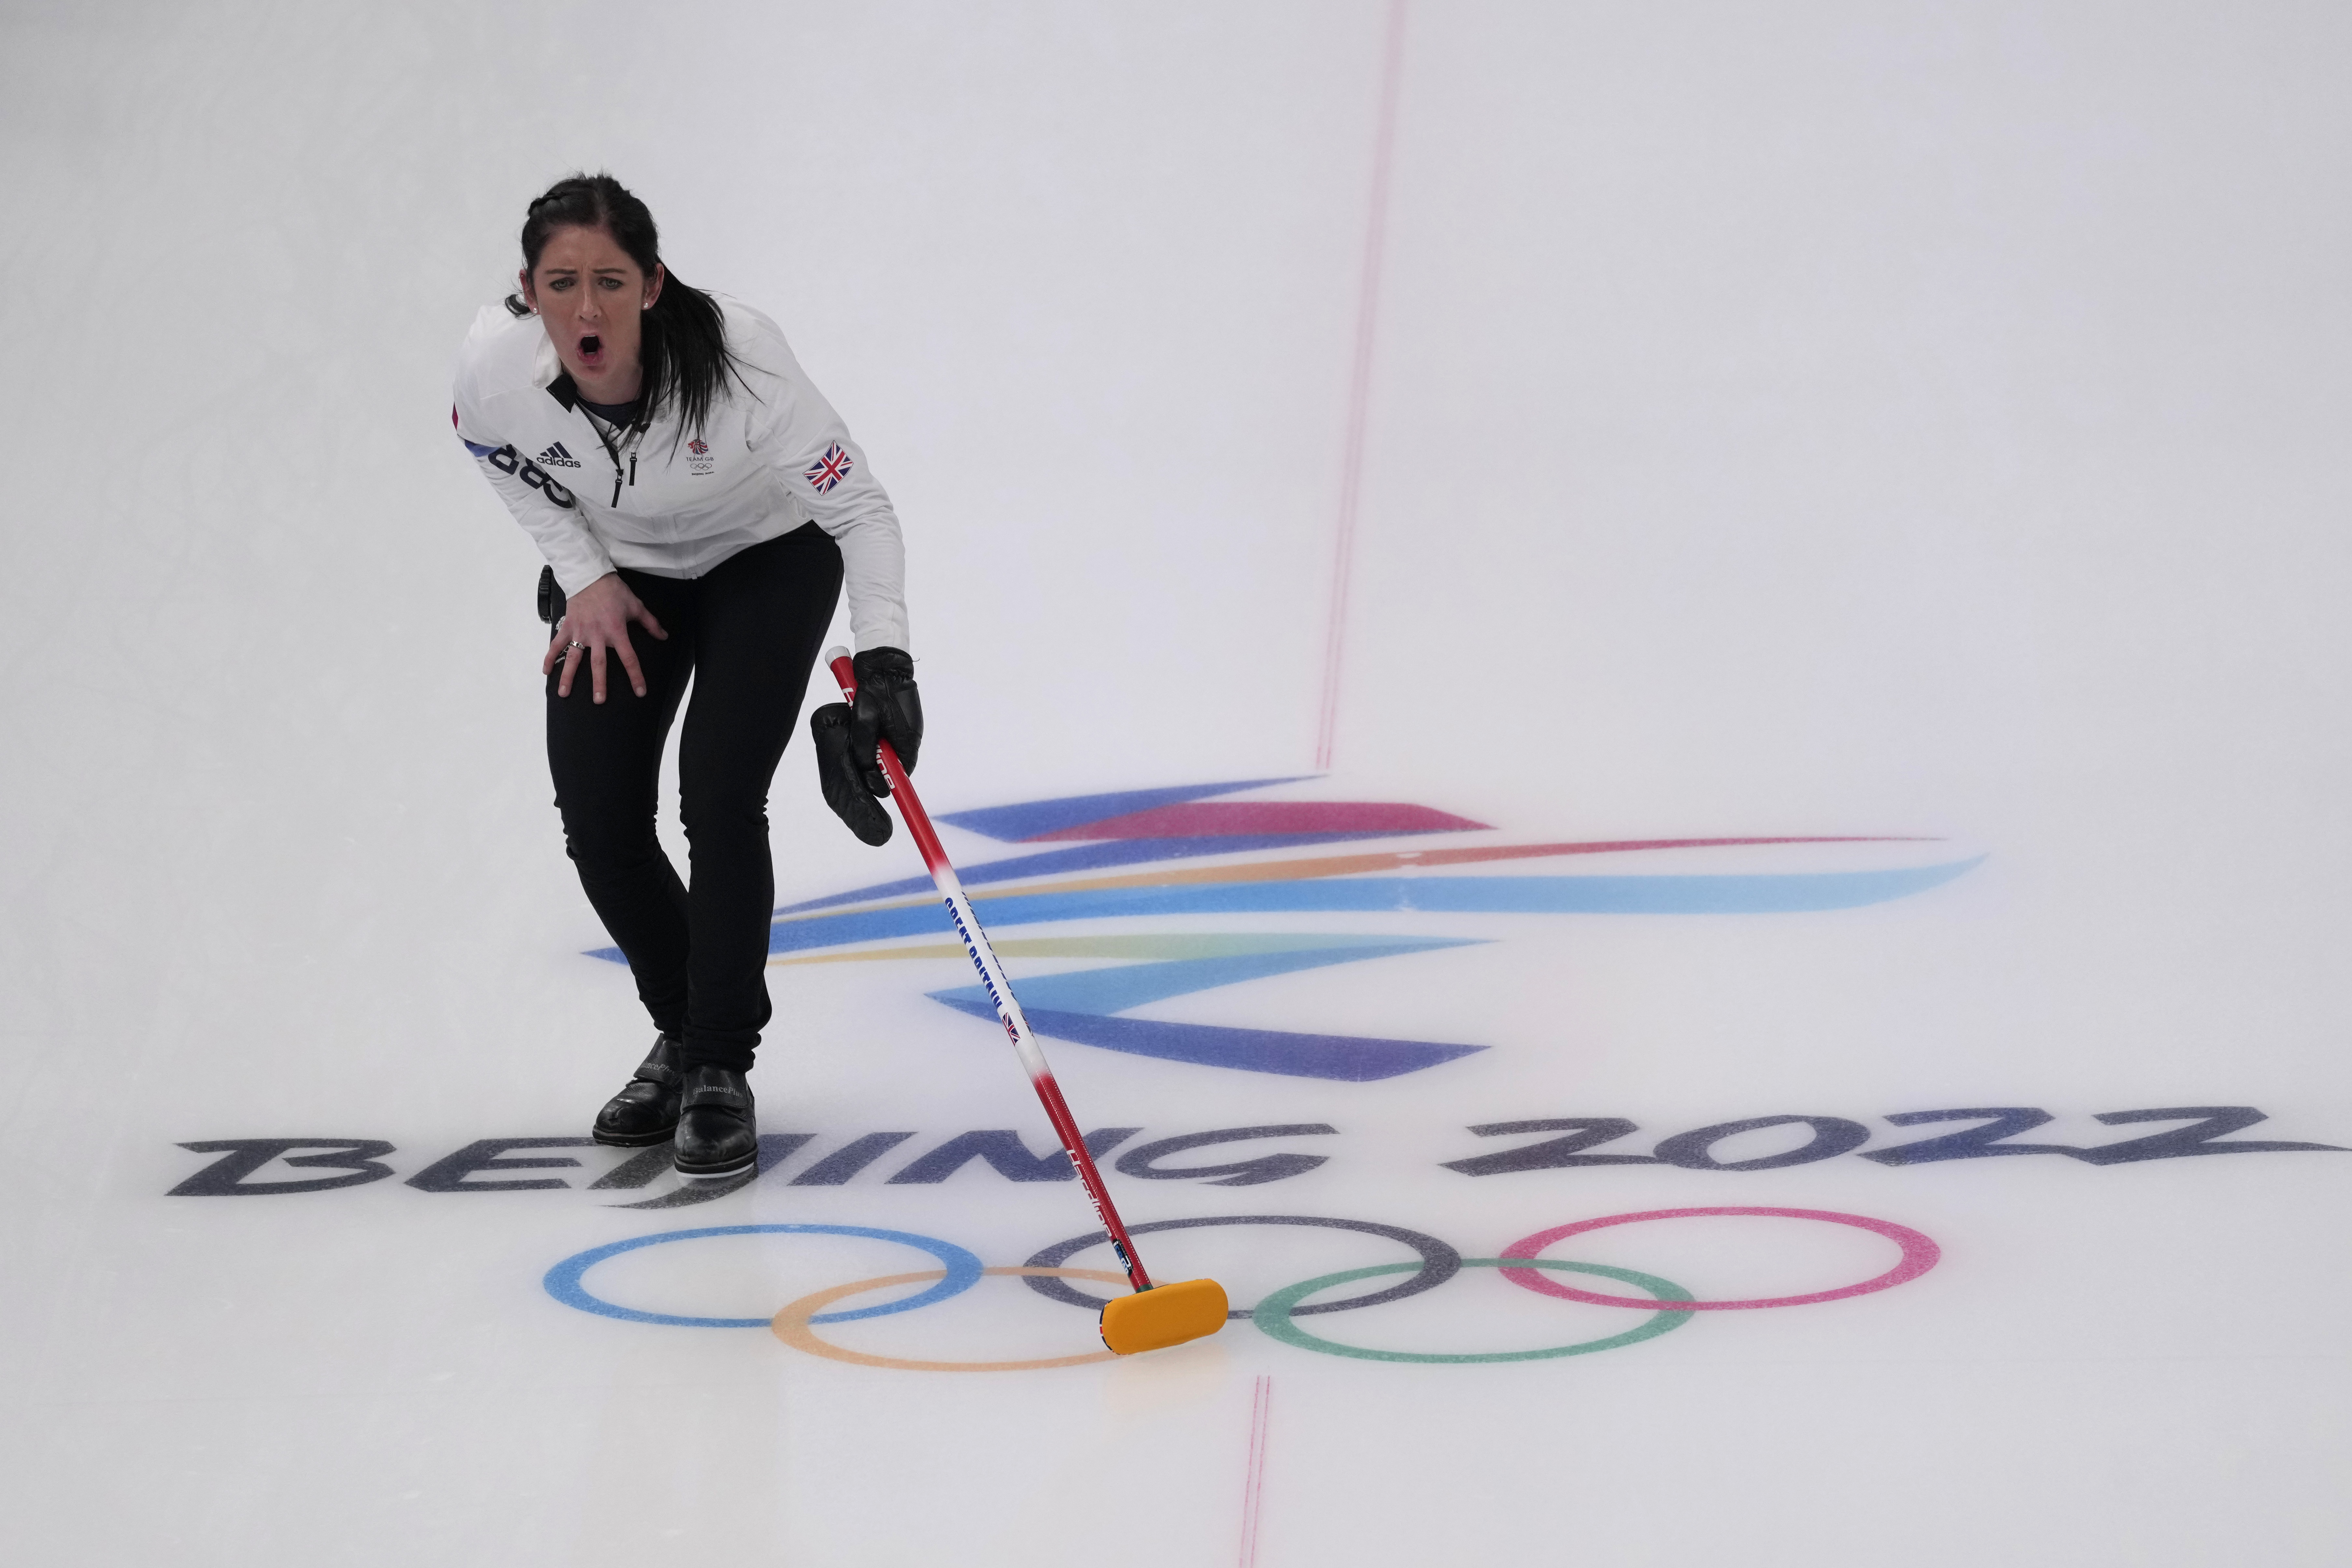 womens curling on tv today